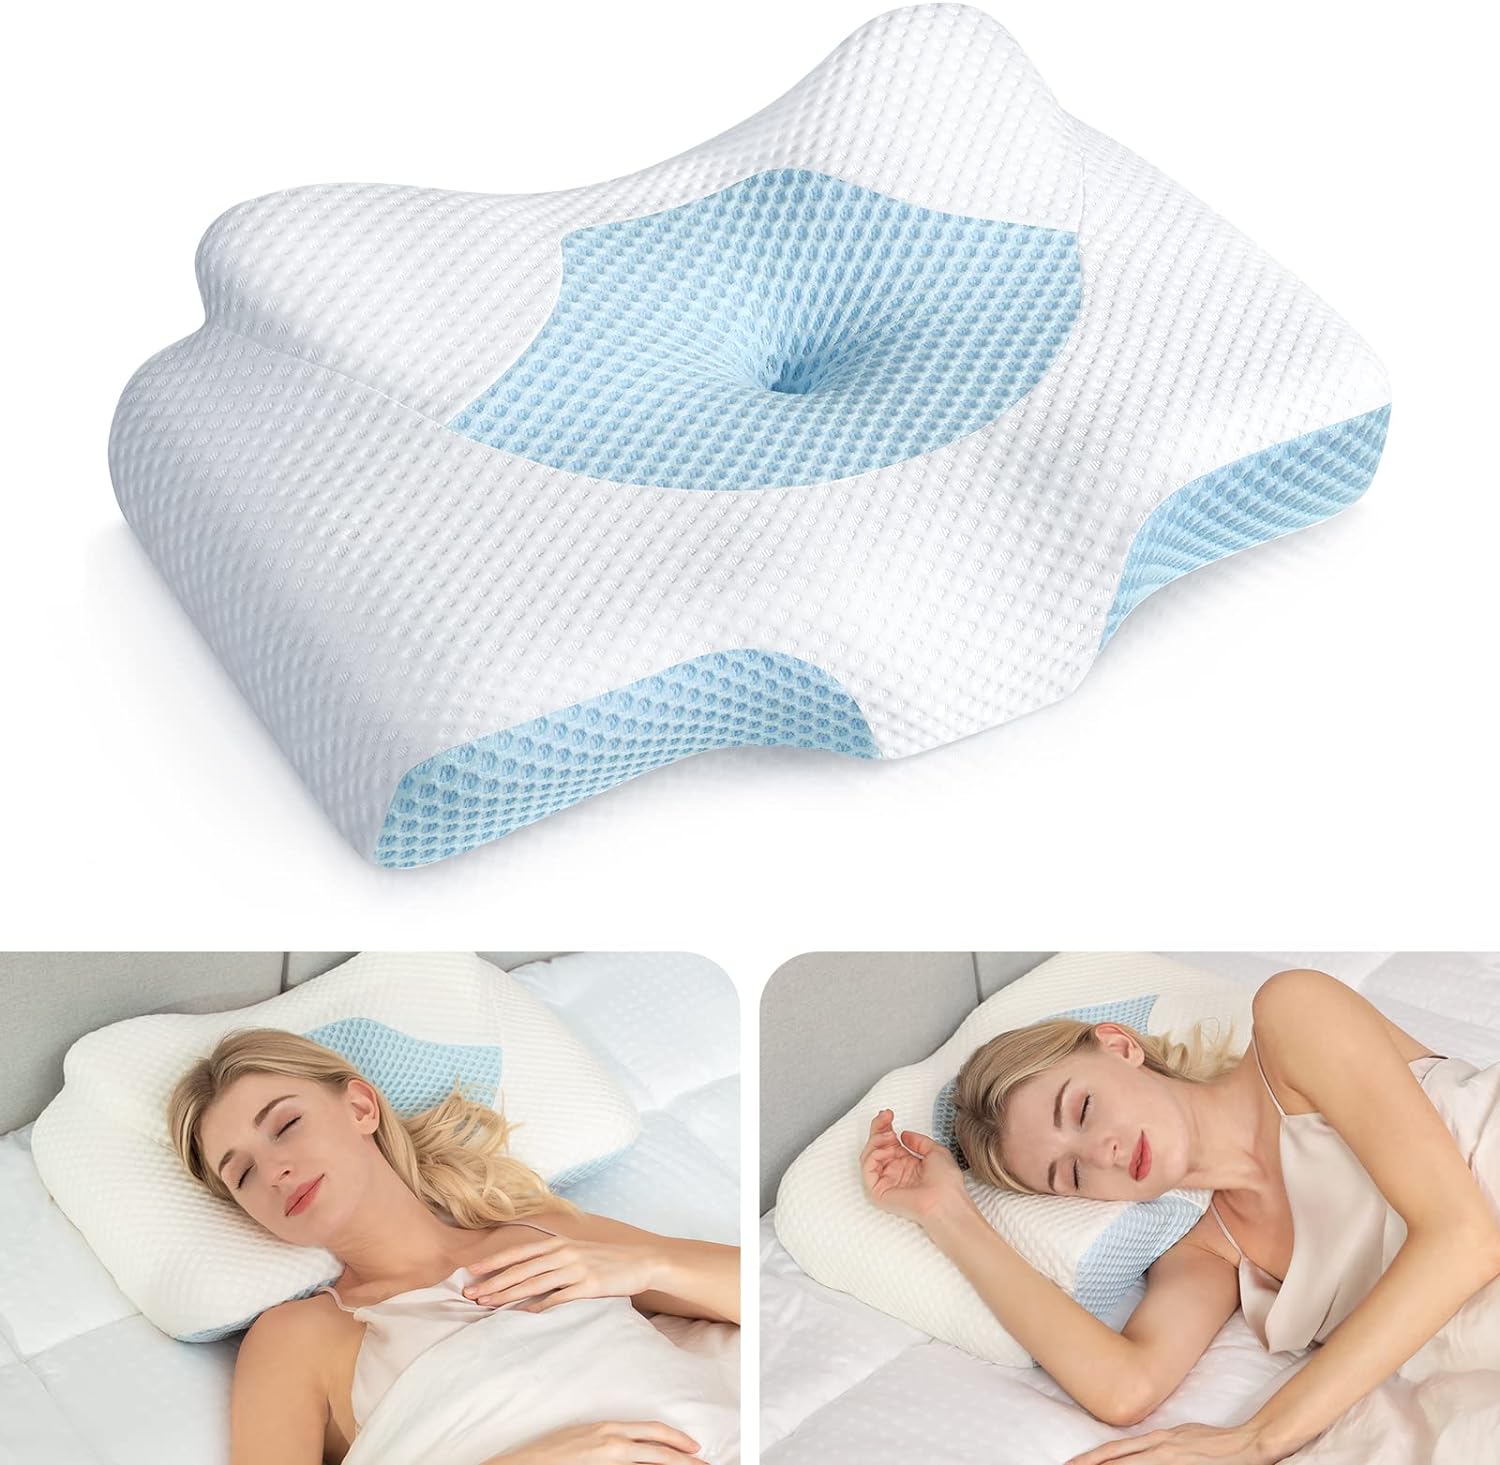 I recently purchased this pillow and it has been an absolute game-changer for me! For the past year, I've struggled with neck pain and discomfort, which often made it difficult to get a good night' sleep. I've tried various pillows in the past, including the My Pillow pillow, but none have provided the support and relief that this one has.From the very first night, I could feel a significant difference. The pillow' design perfectly cradles my neck and head, providing just the right amount of